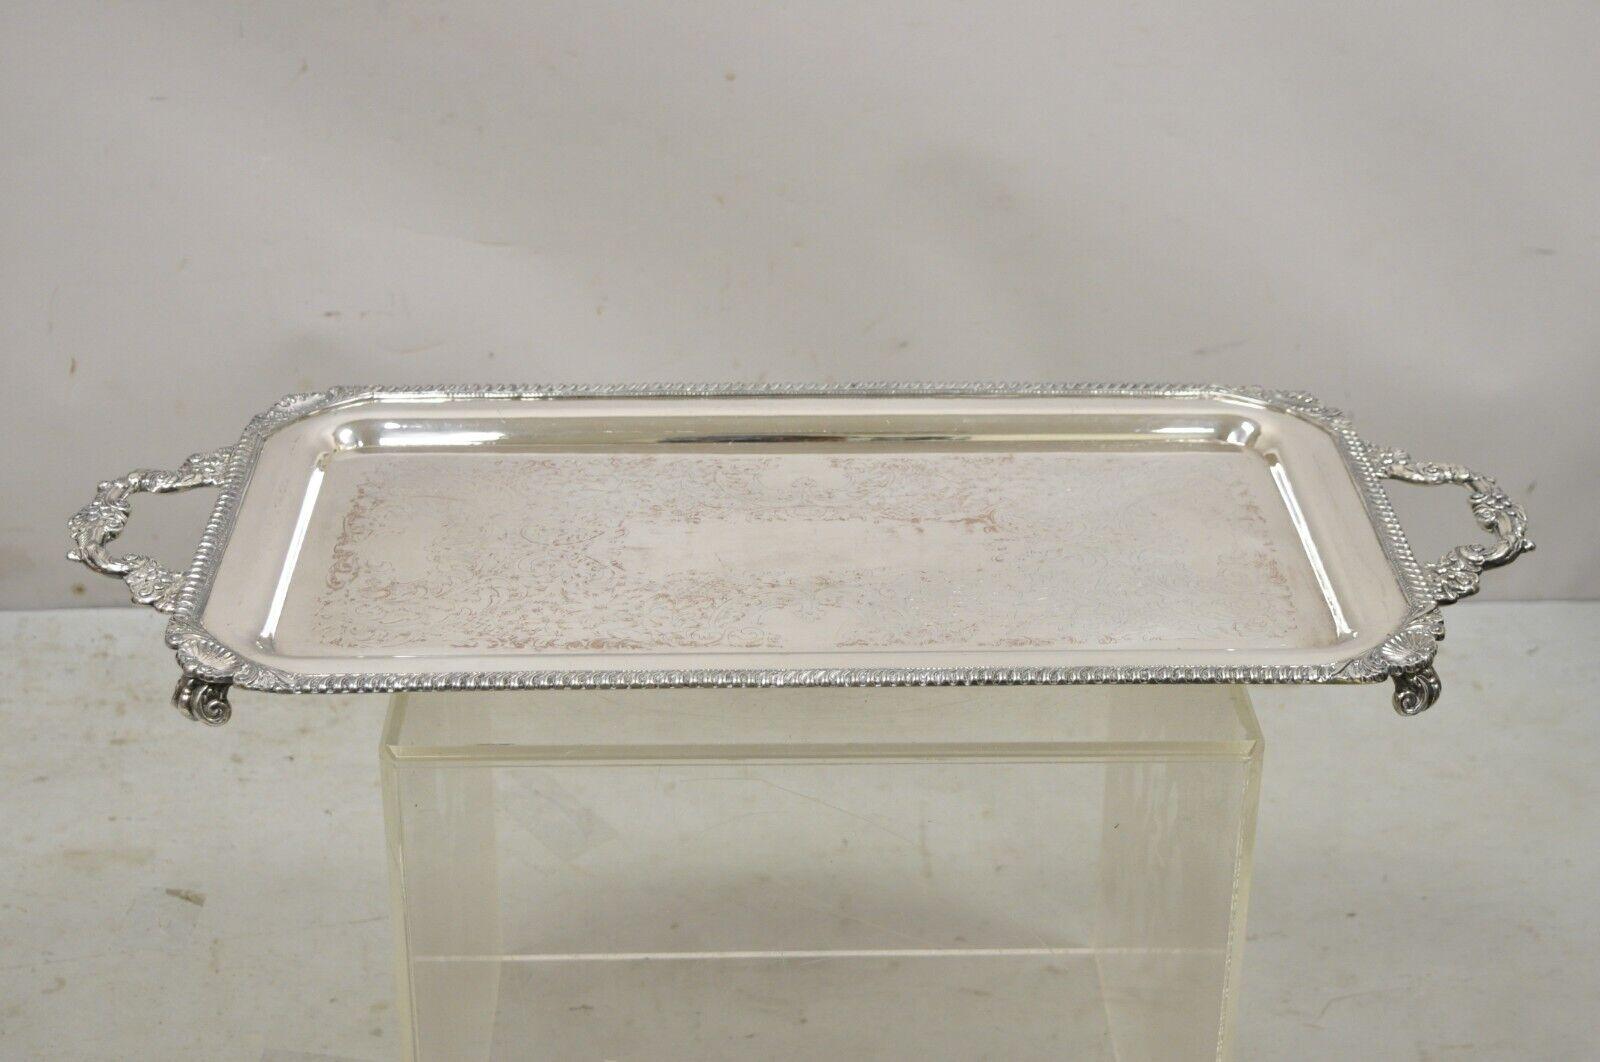 Vintage Victorian style silver plated twin handle ornate serving platter tray. Item features a nice narrow form, 